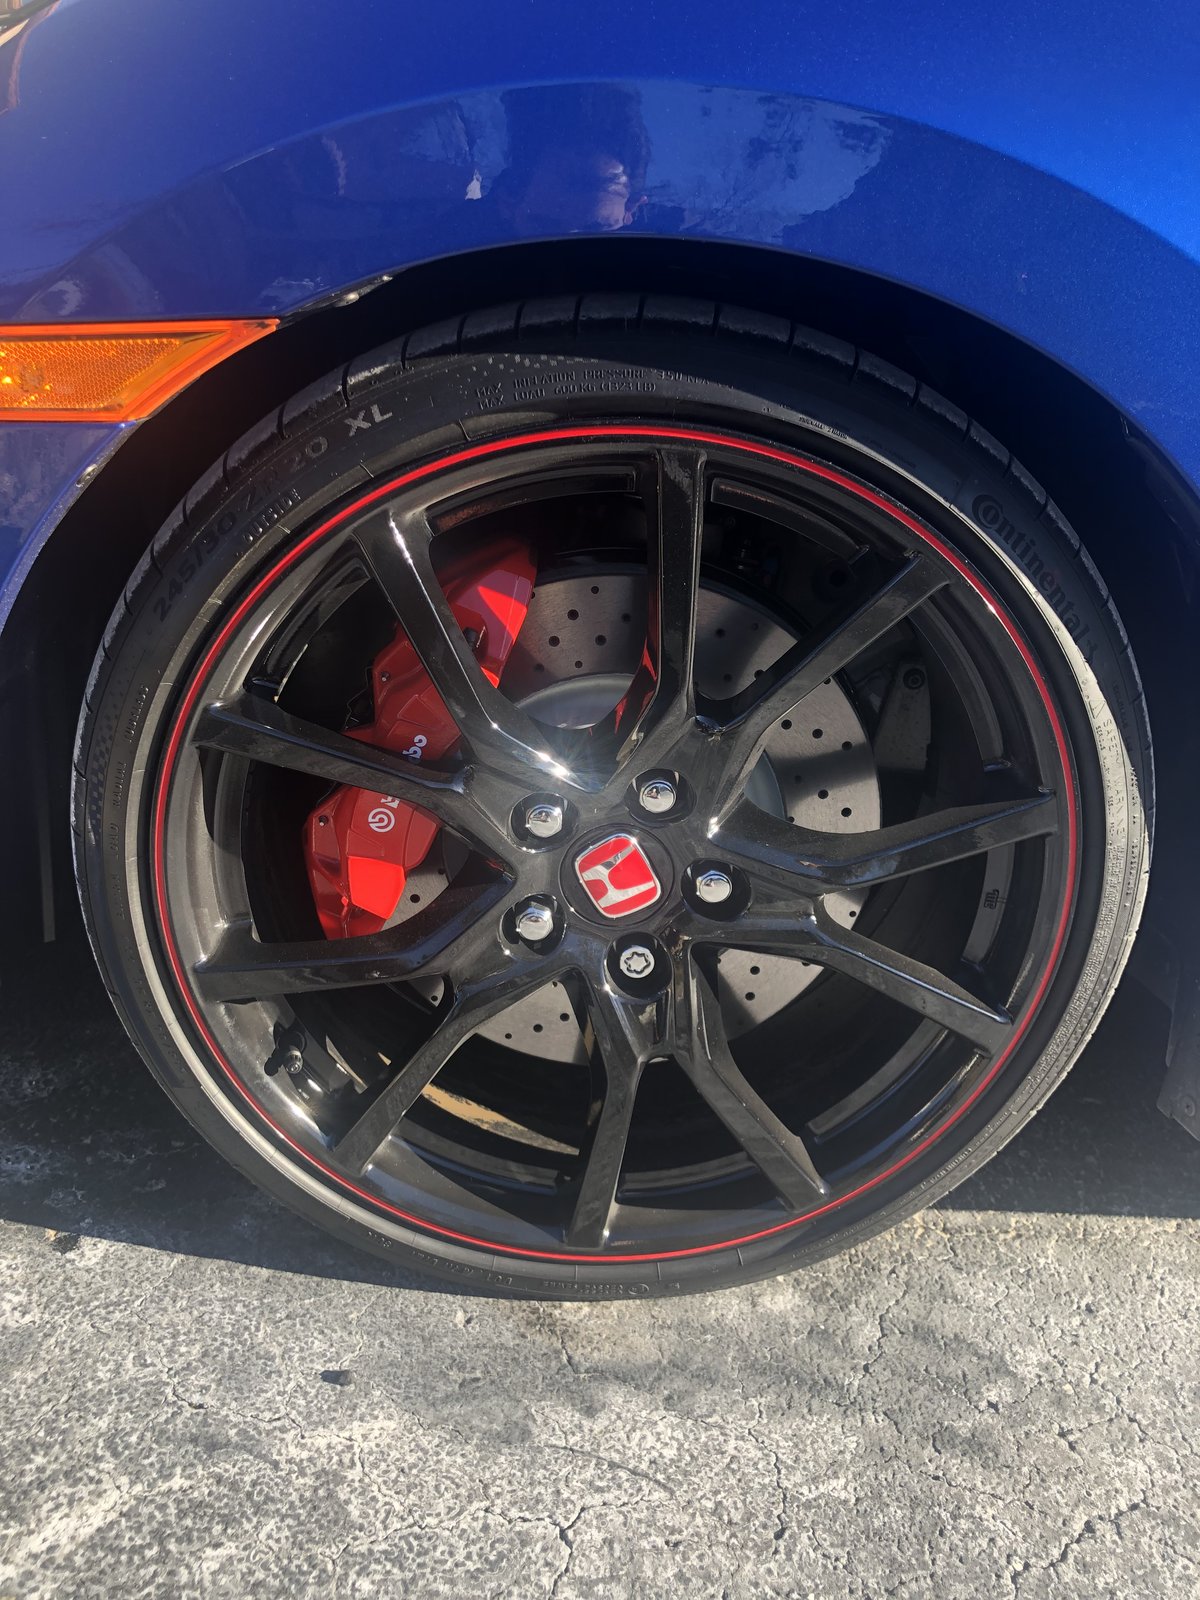 Brand new type R wheels and tires | 2016+ Honda Civic Forum (10th Gen ...